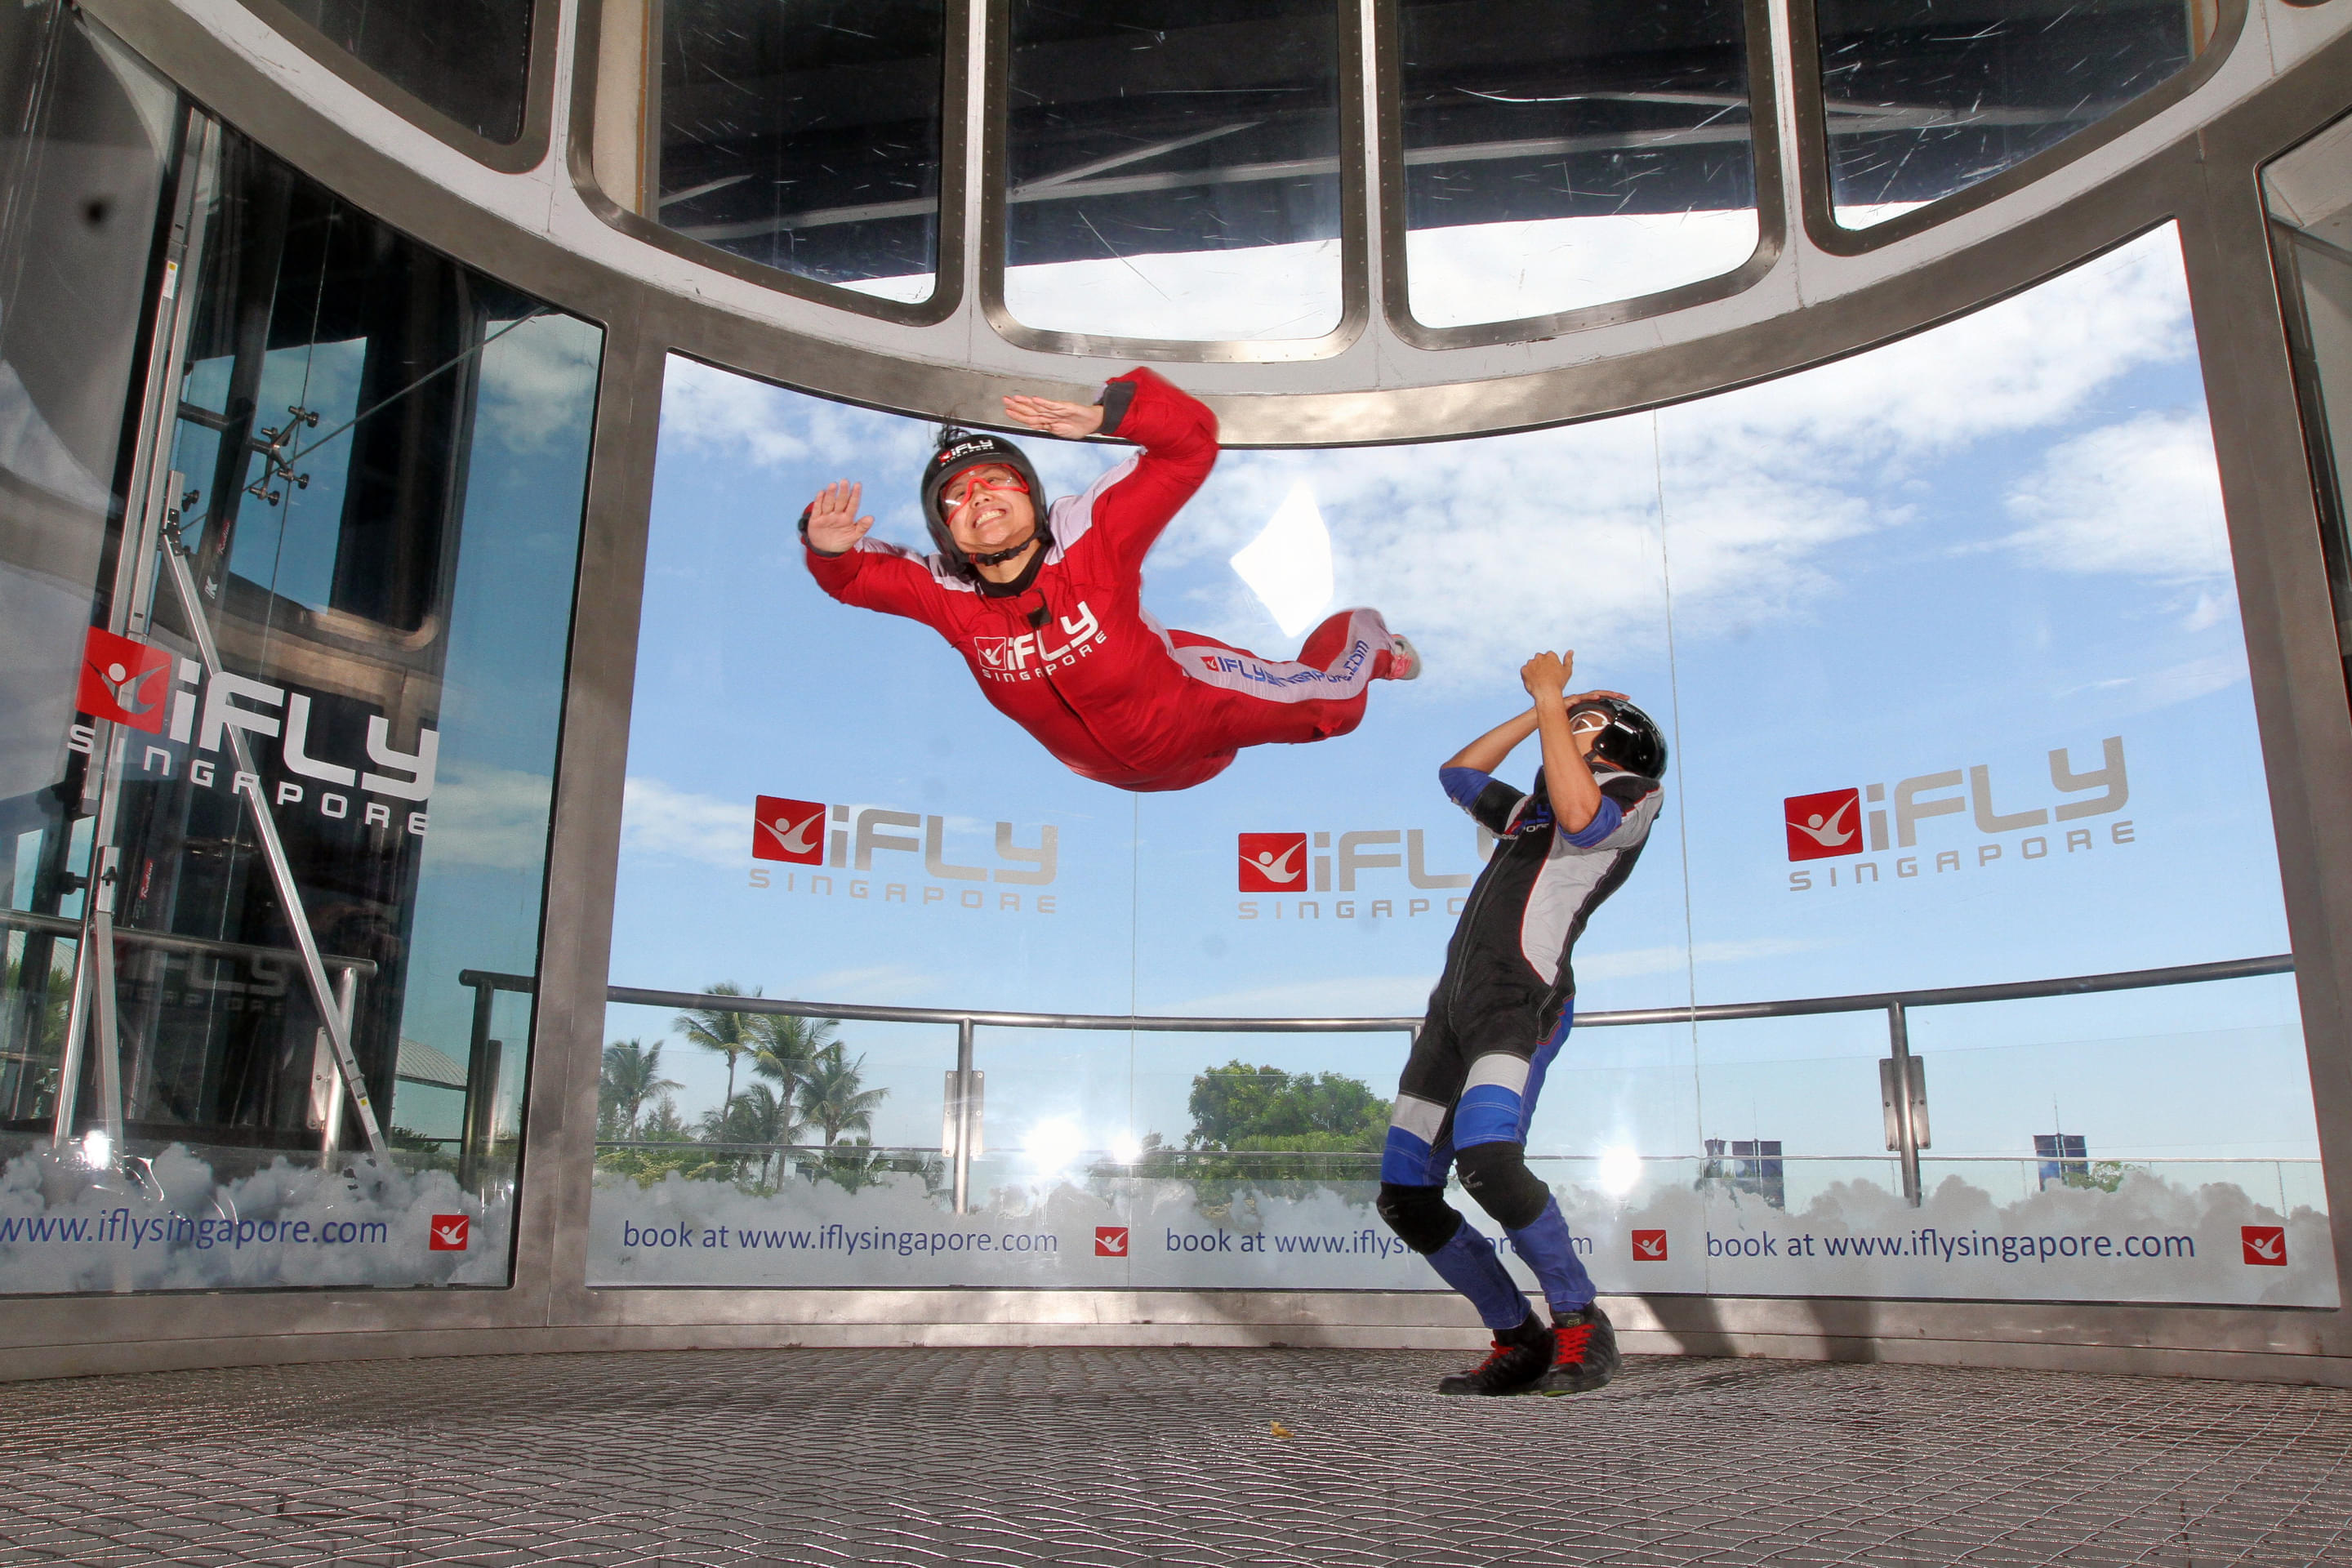 IFly Singapore Overview